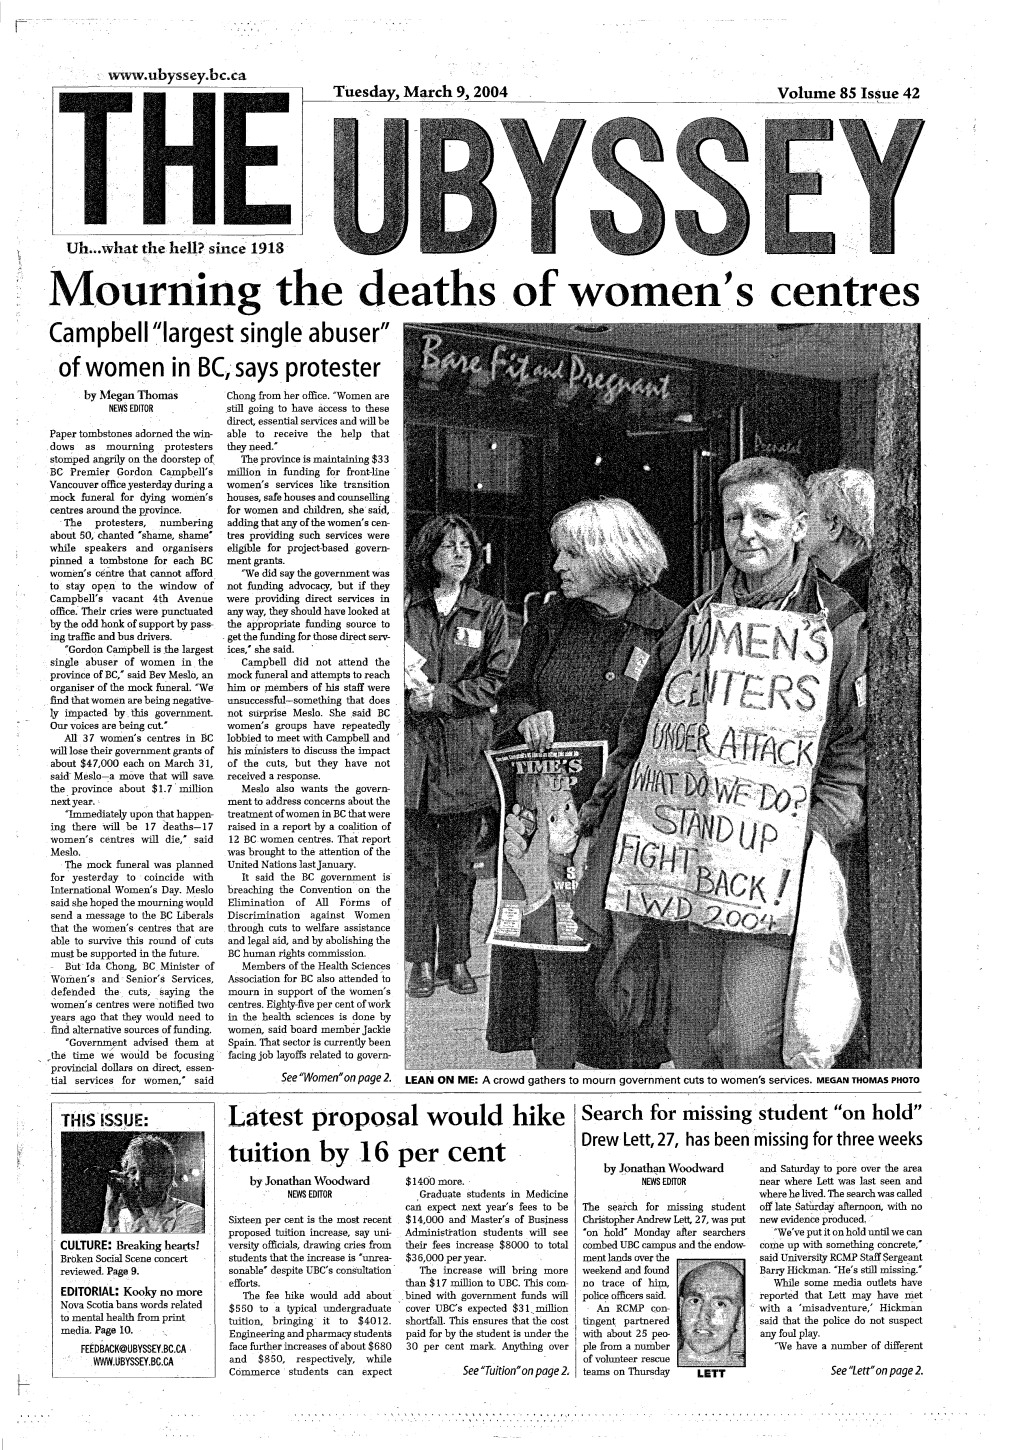 Mourning the Deaths of Women's Centres Campbell 'Largest Single Abuser" of Women in BQ Says Protester by Megan Thomas Chong from Her Office